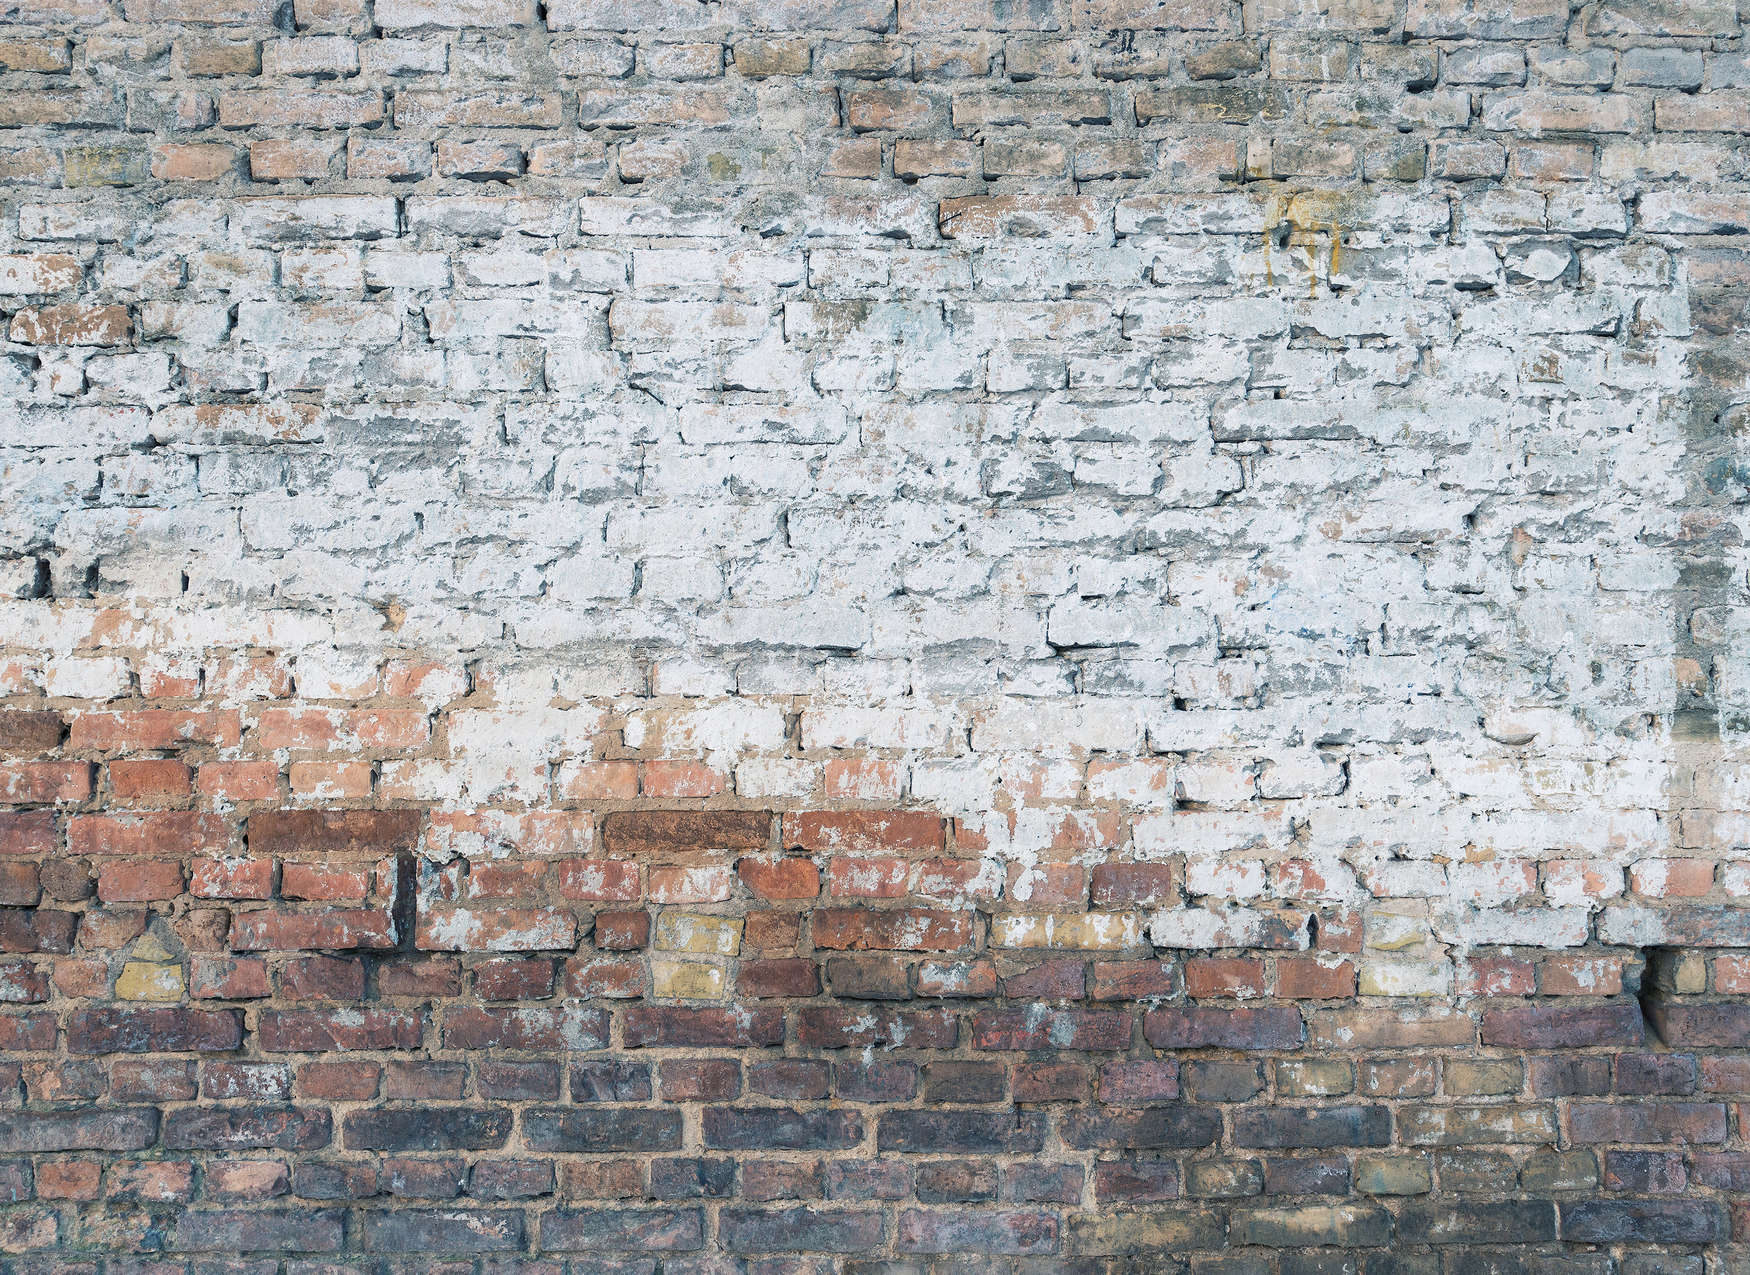             Photo wallpaper with brick wall in realistic industrial style - brown, grey, white
        